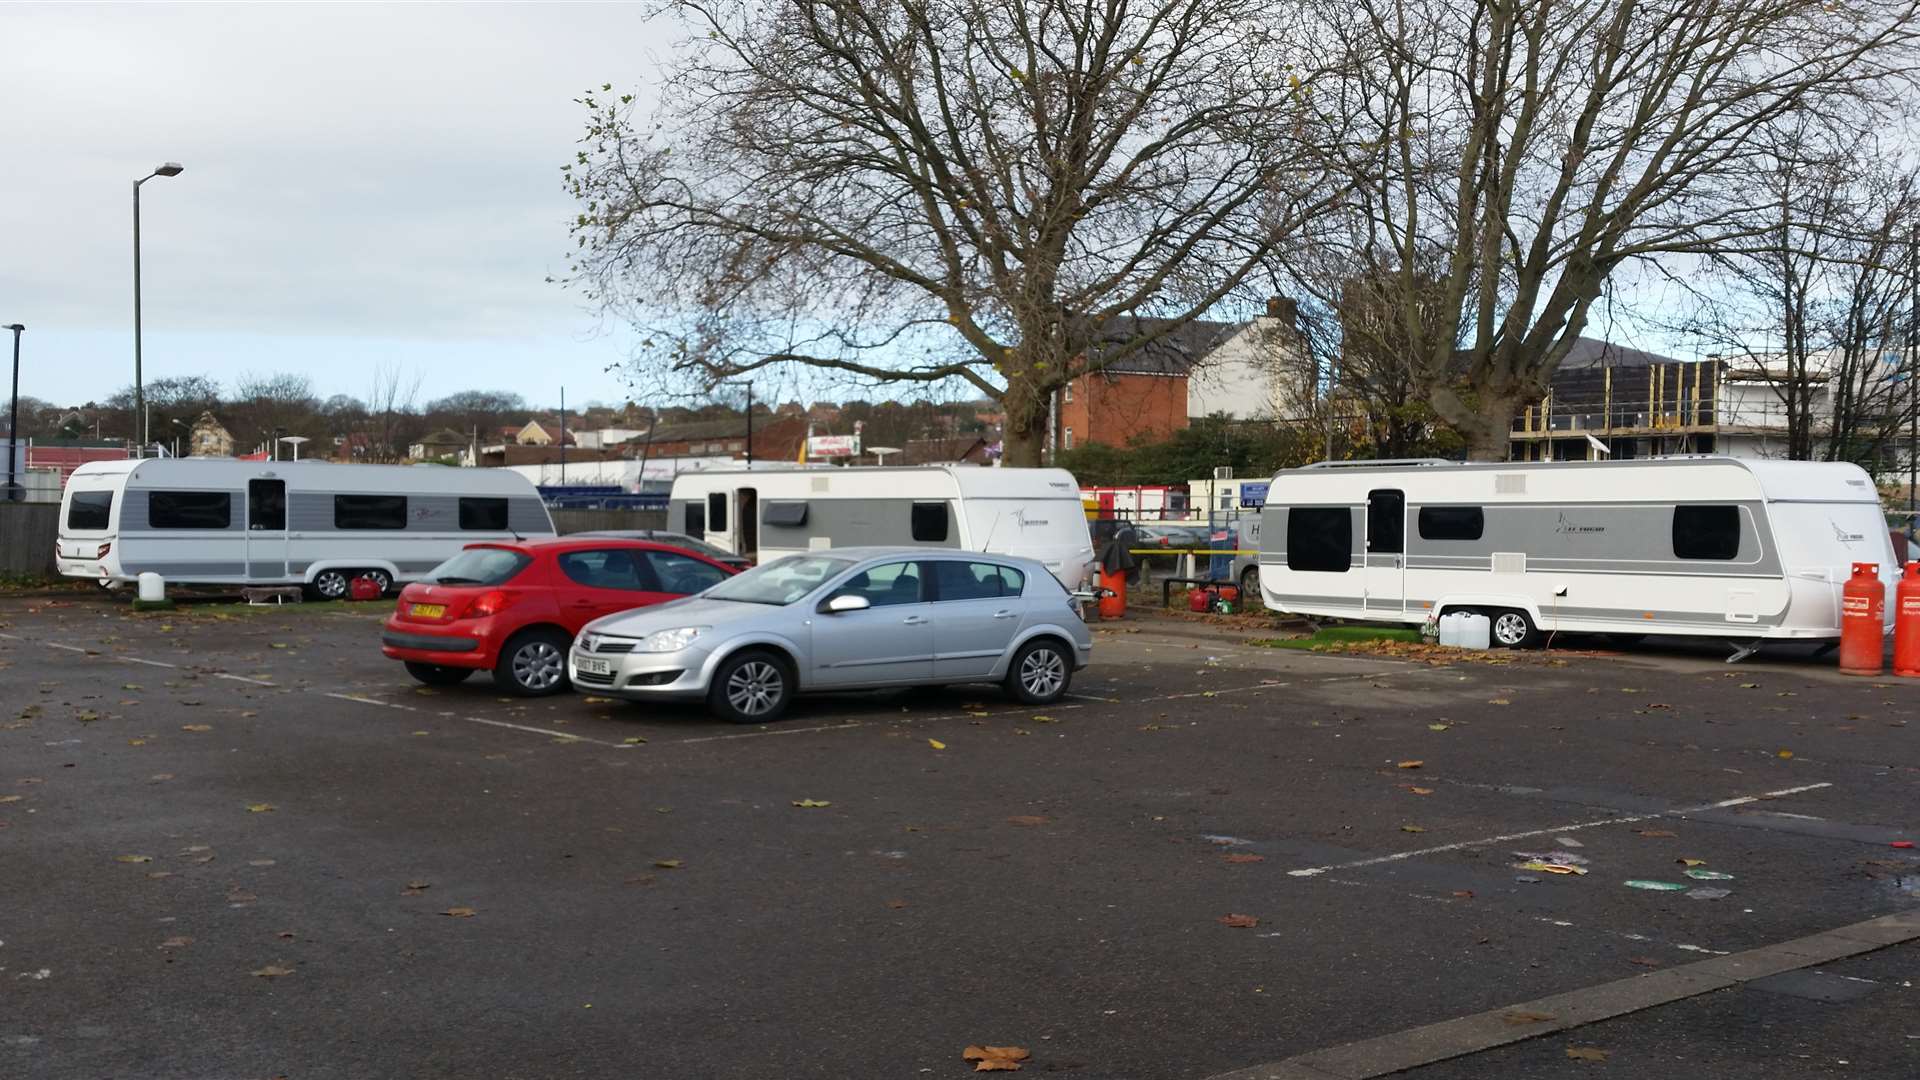 Travellers in Commercial Road car park, Strood